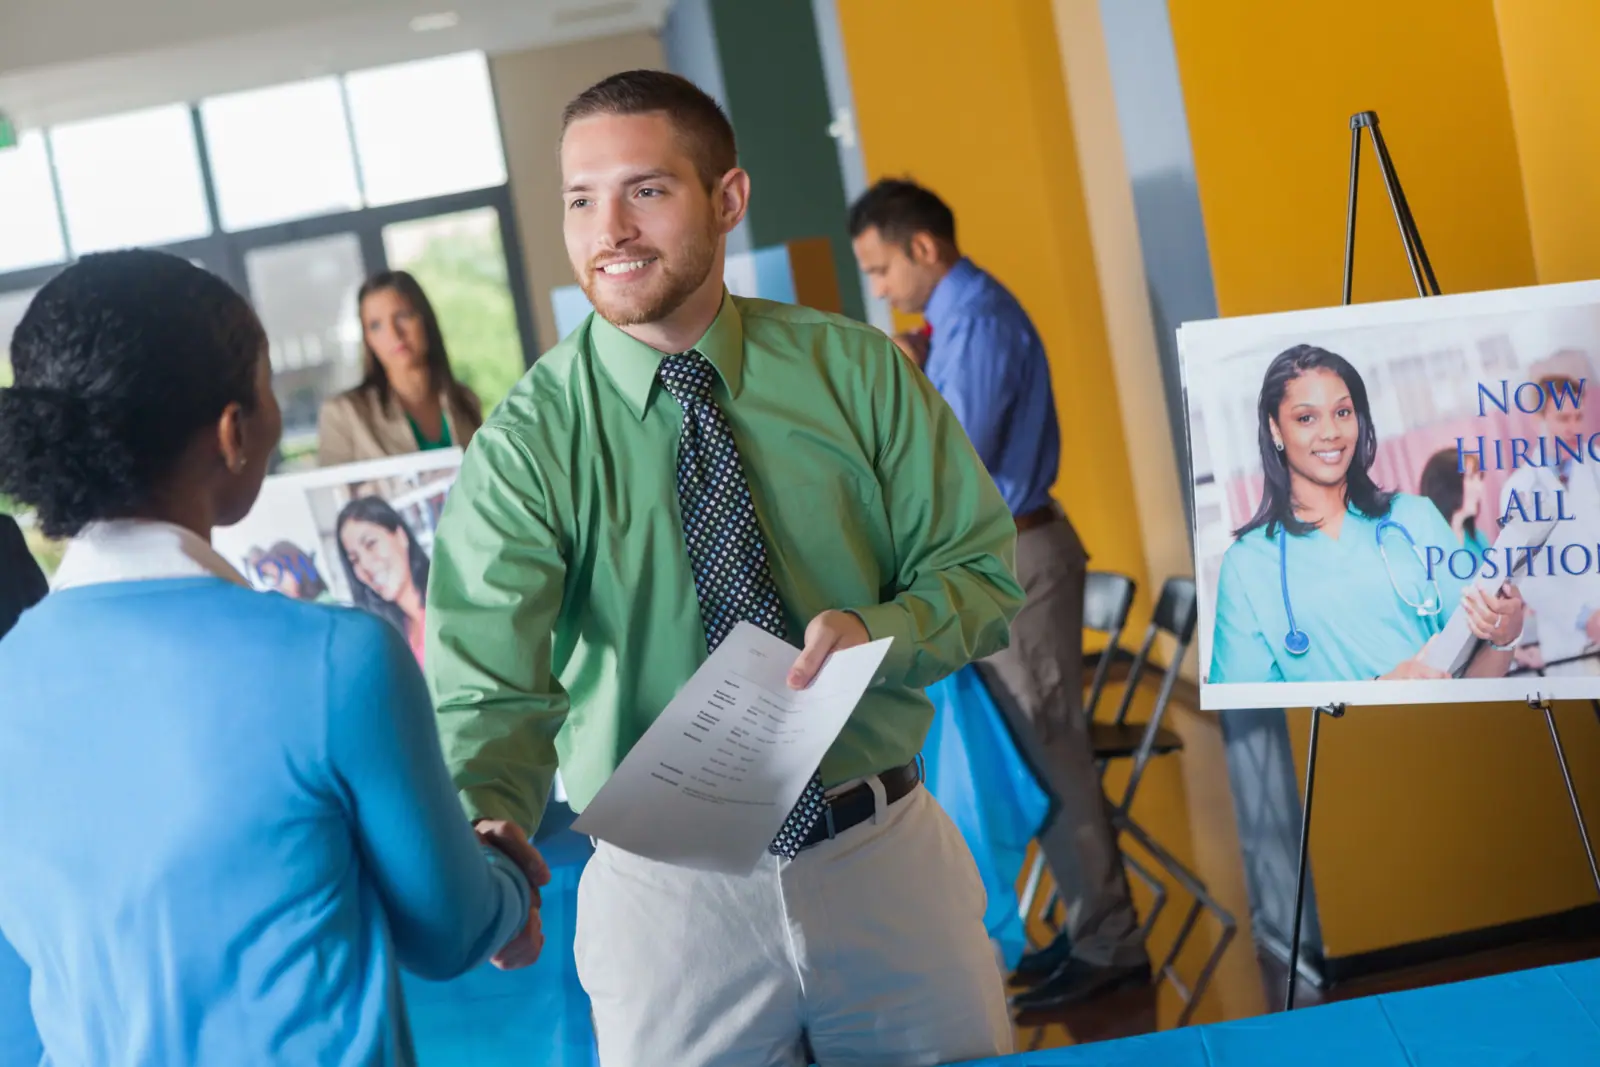 7 Tips For Following Up After a Career Fair